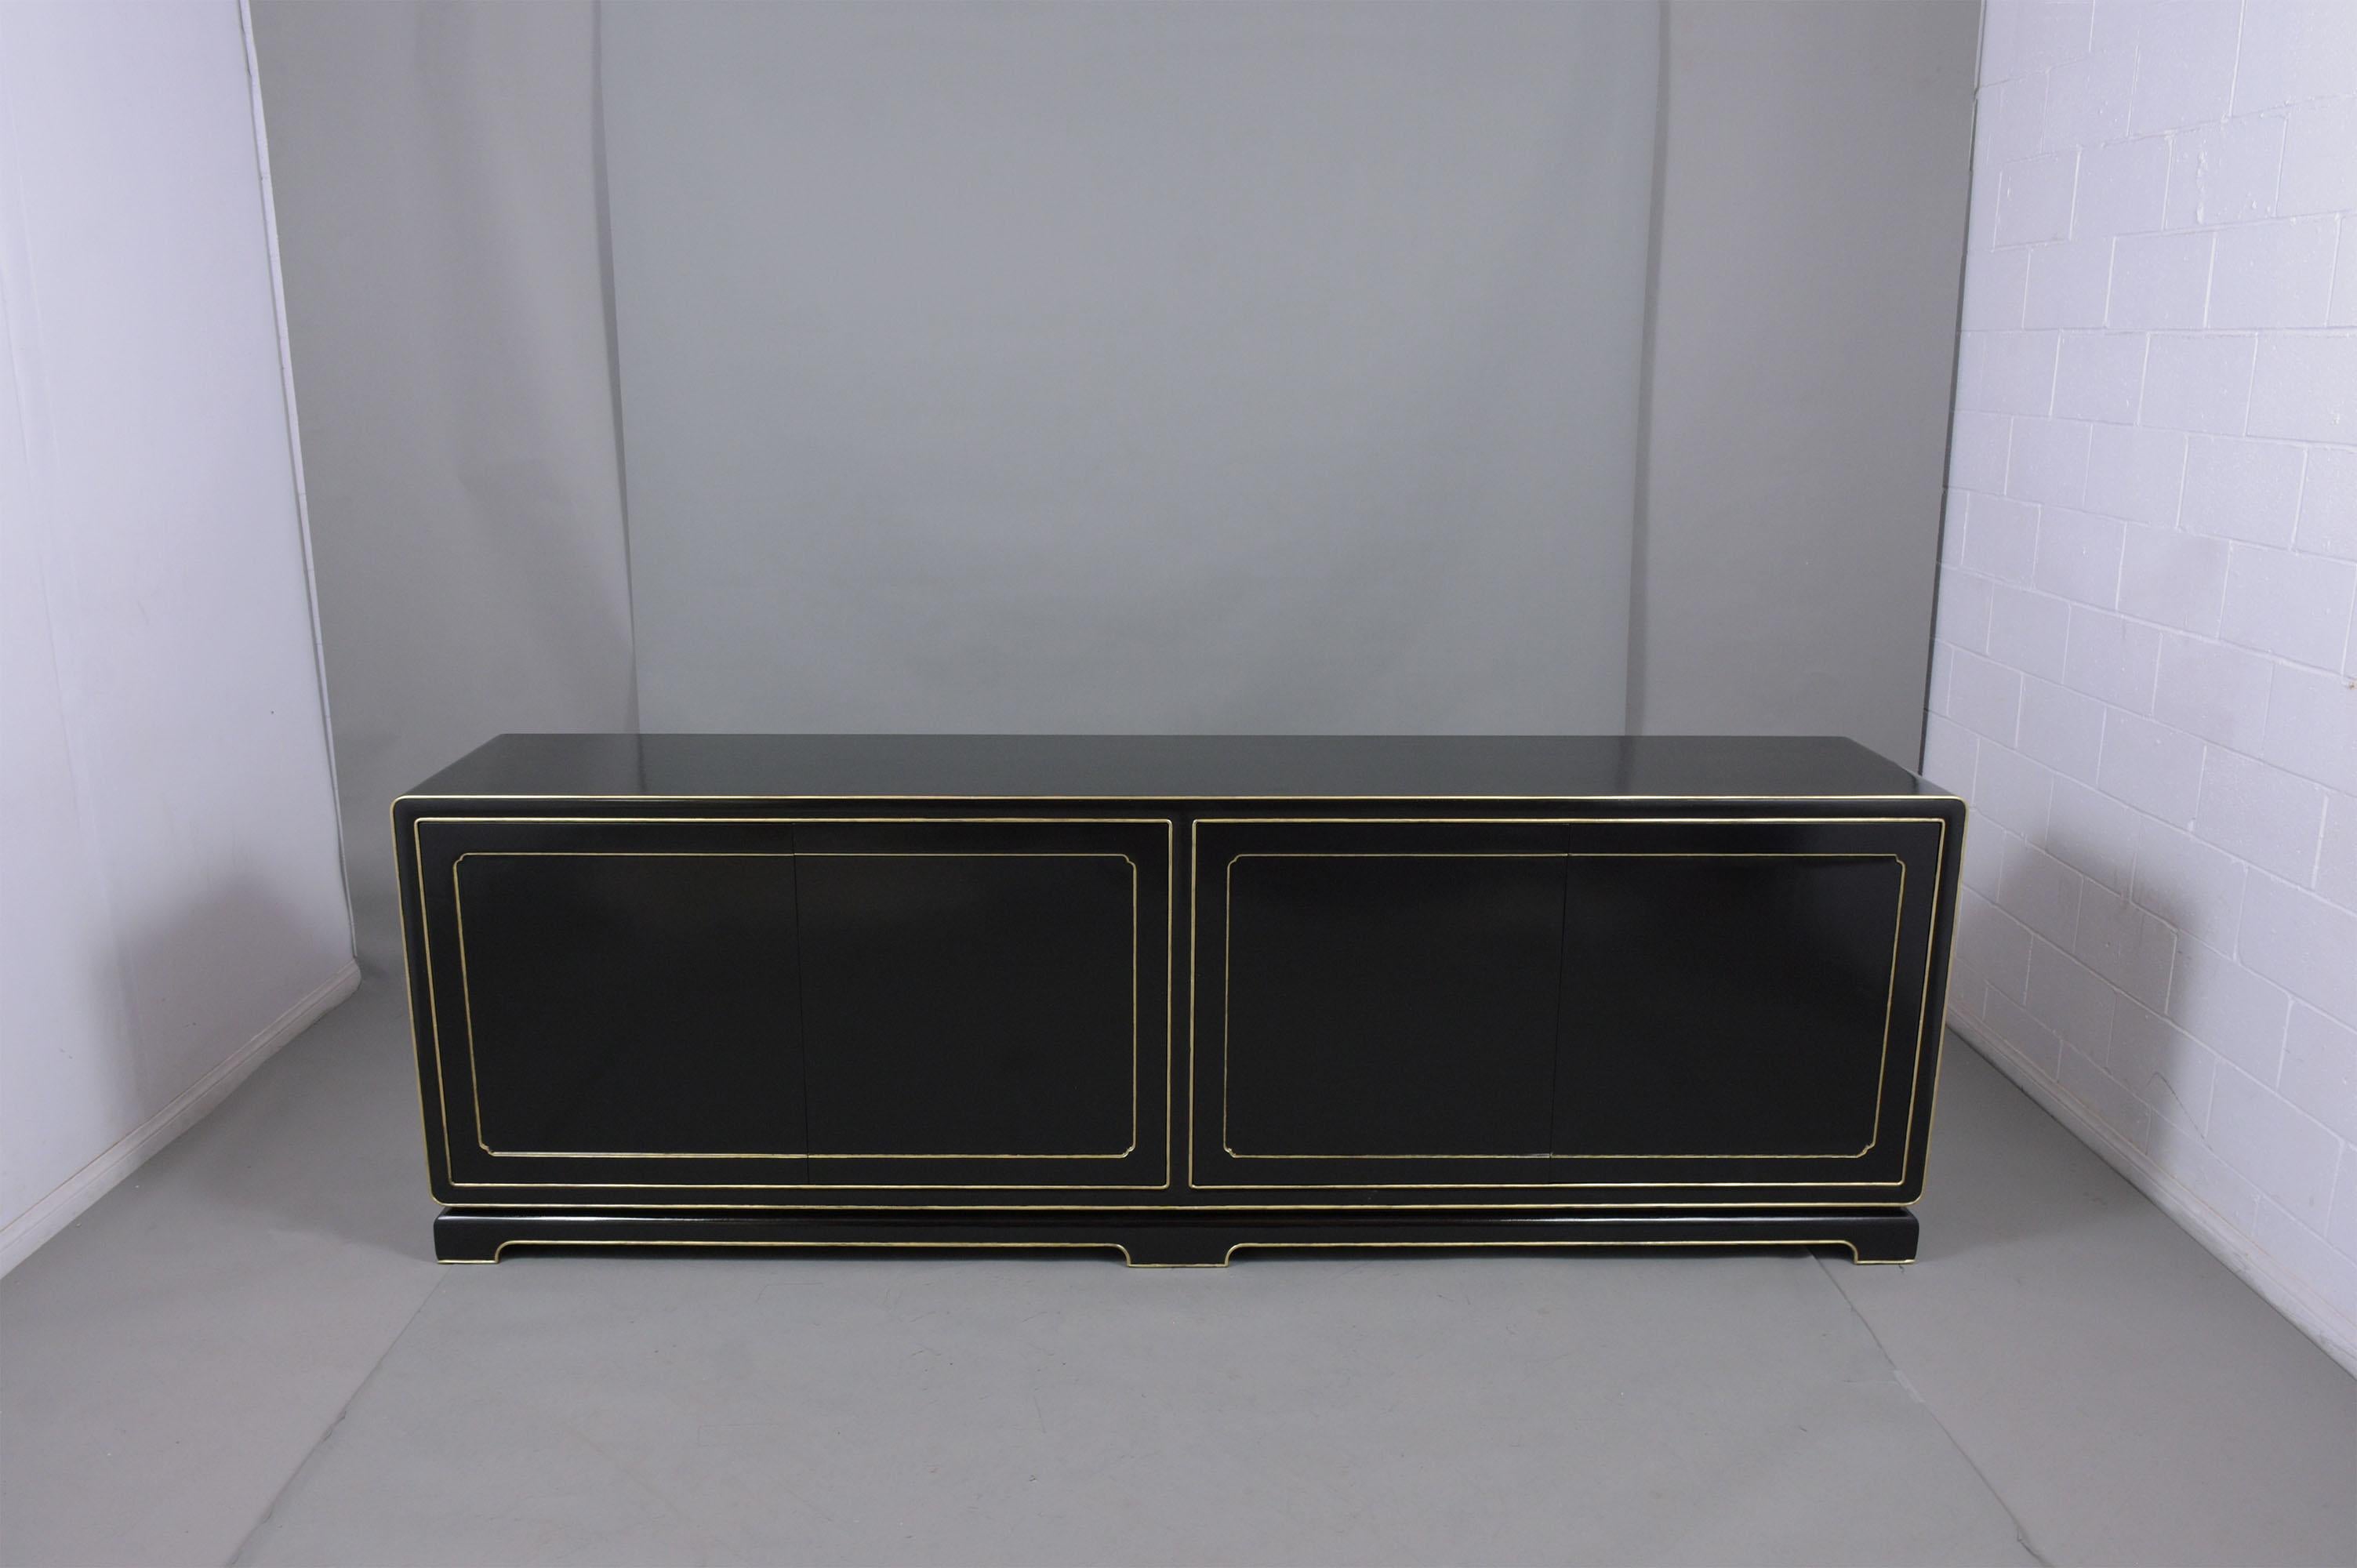 A sleek mid-century modern ebonized credenza is handcrafted out of mahogany wood stained in an elegant ebonized color with gilt molding details and a newly lacquered finish by our team of expert craftsmen. This fabulous vintage buffet has four push